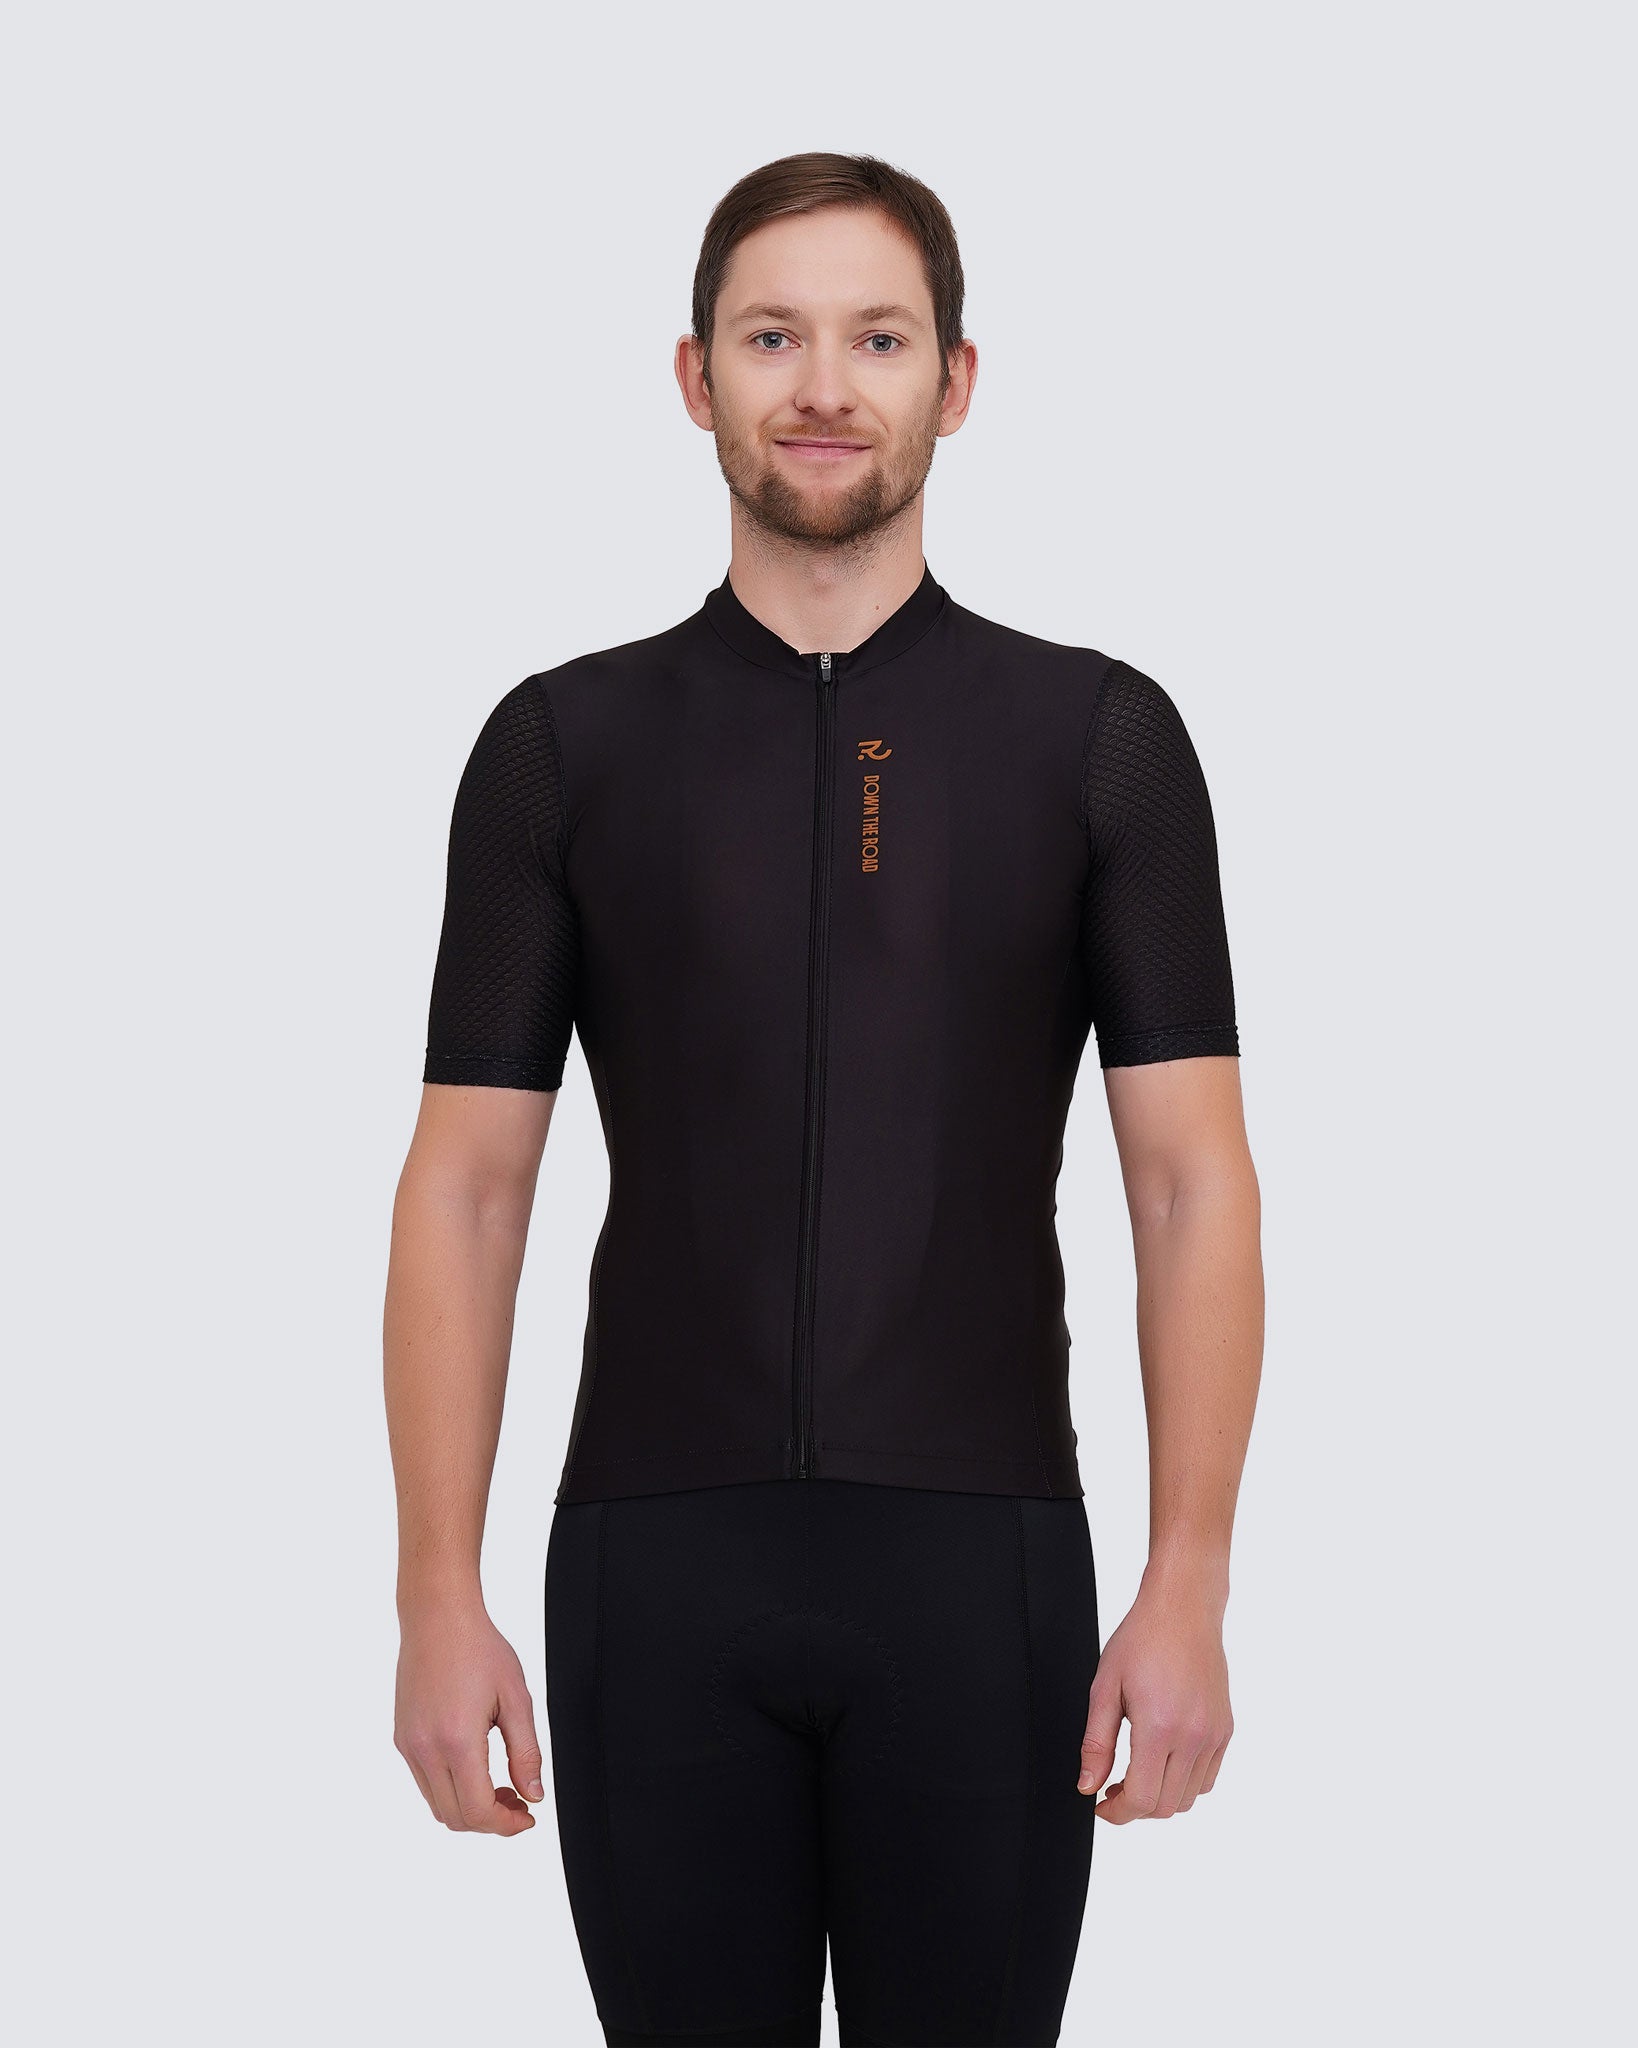 racing black men cycling jersey front view